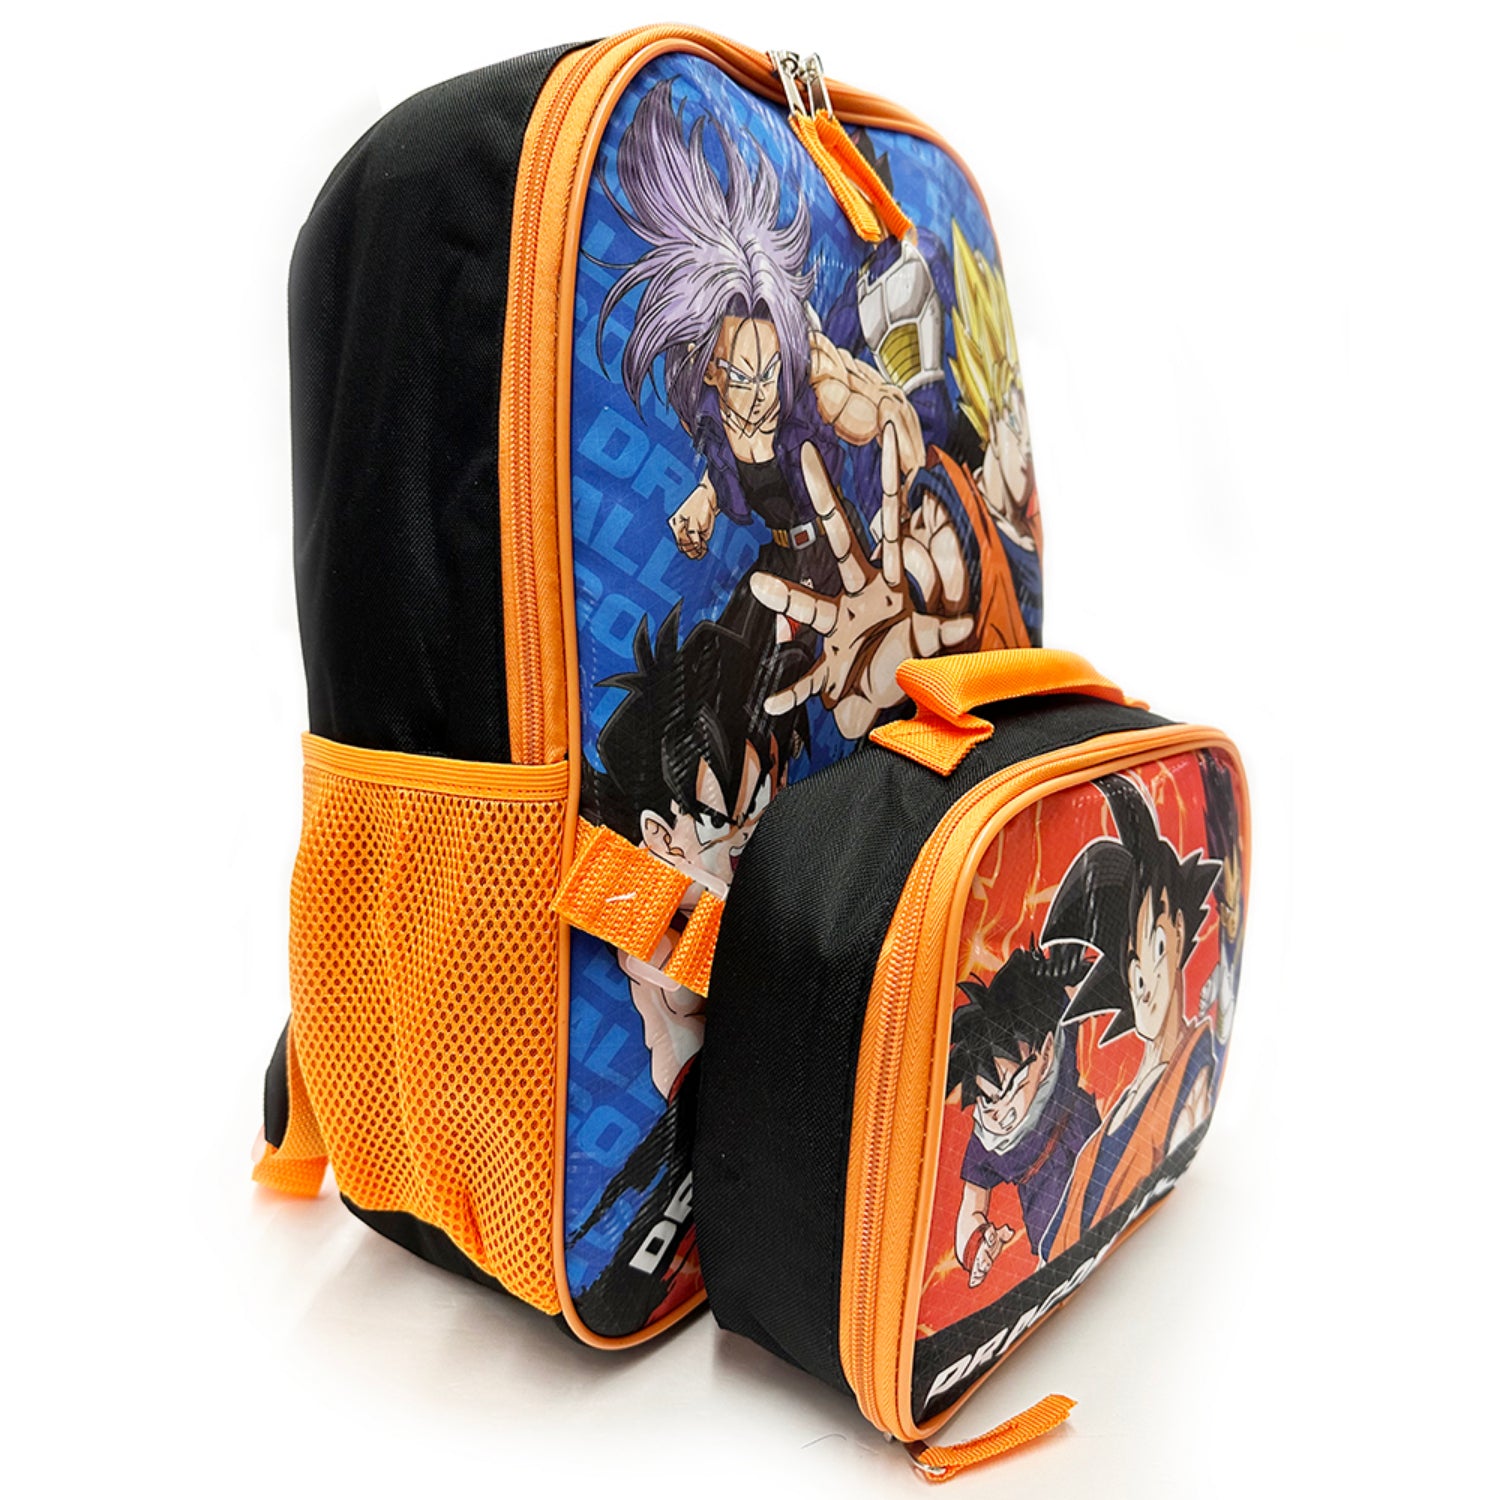 Bioworld Dragon Ball Z Backpack with Lunchbag